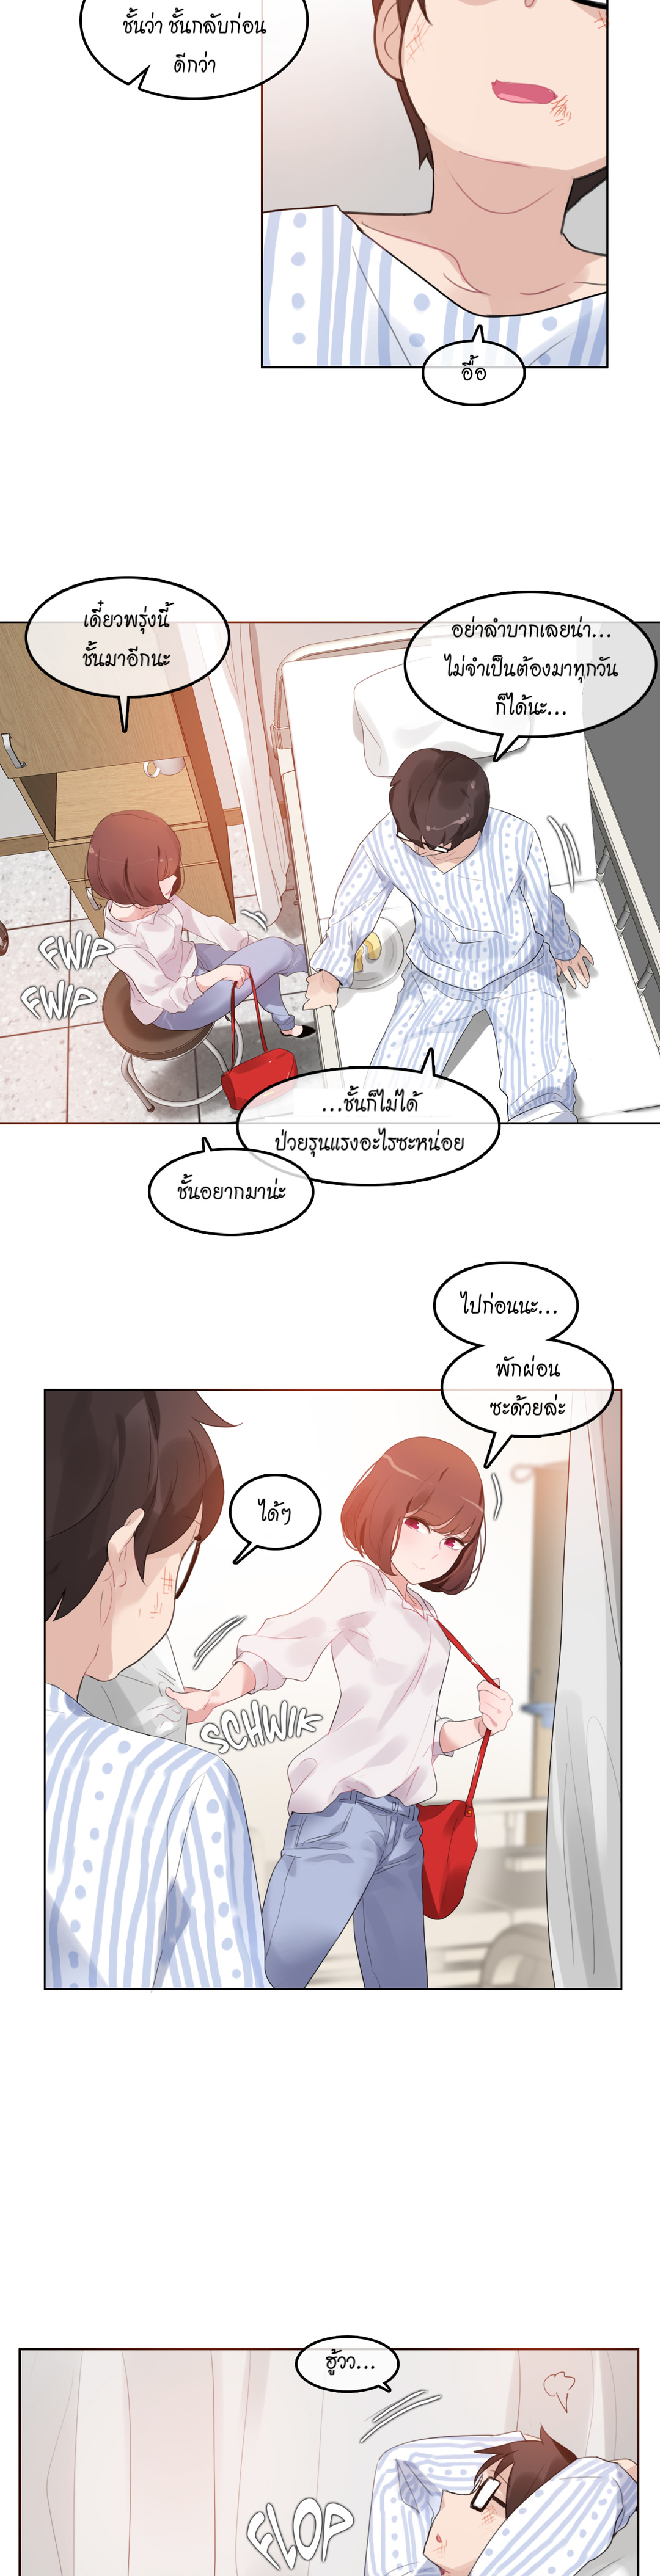 A Pervert’s Daily Life 46 16